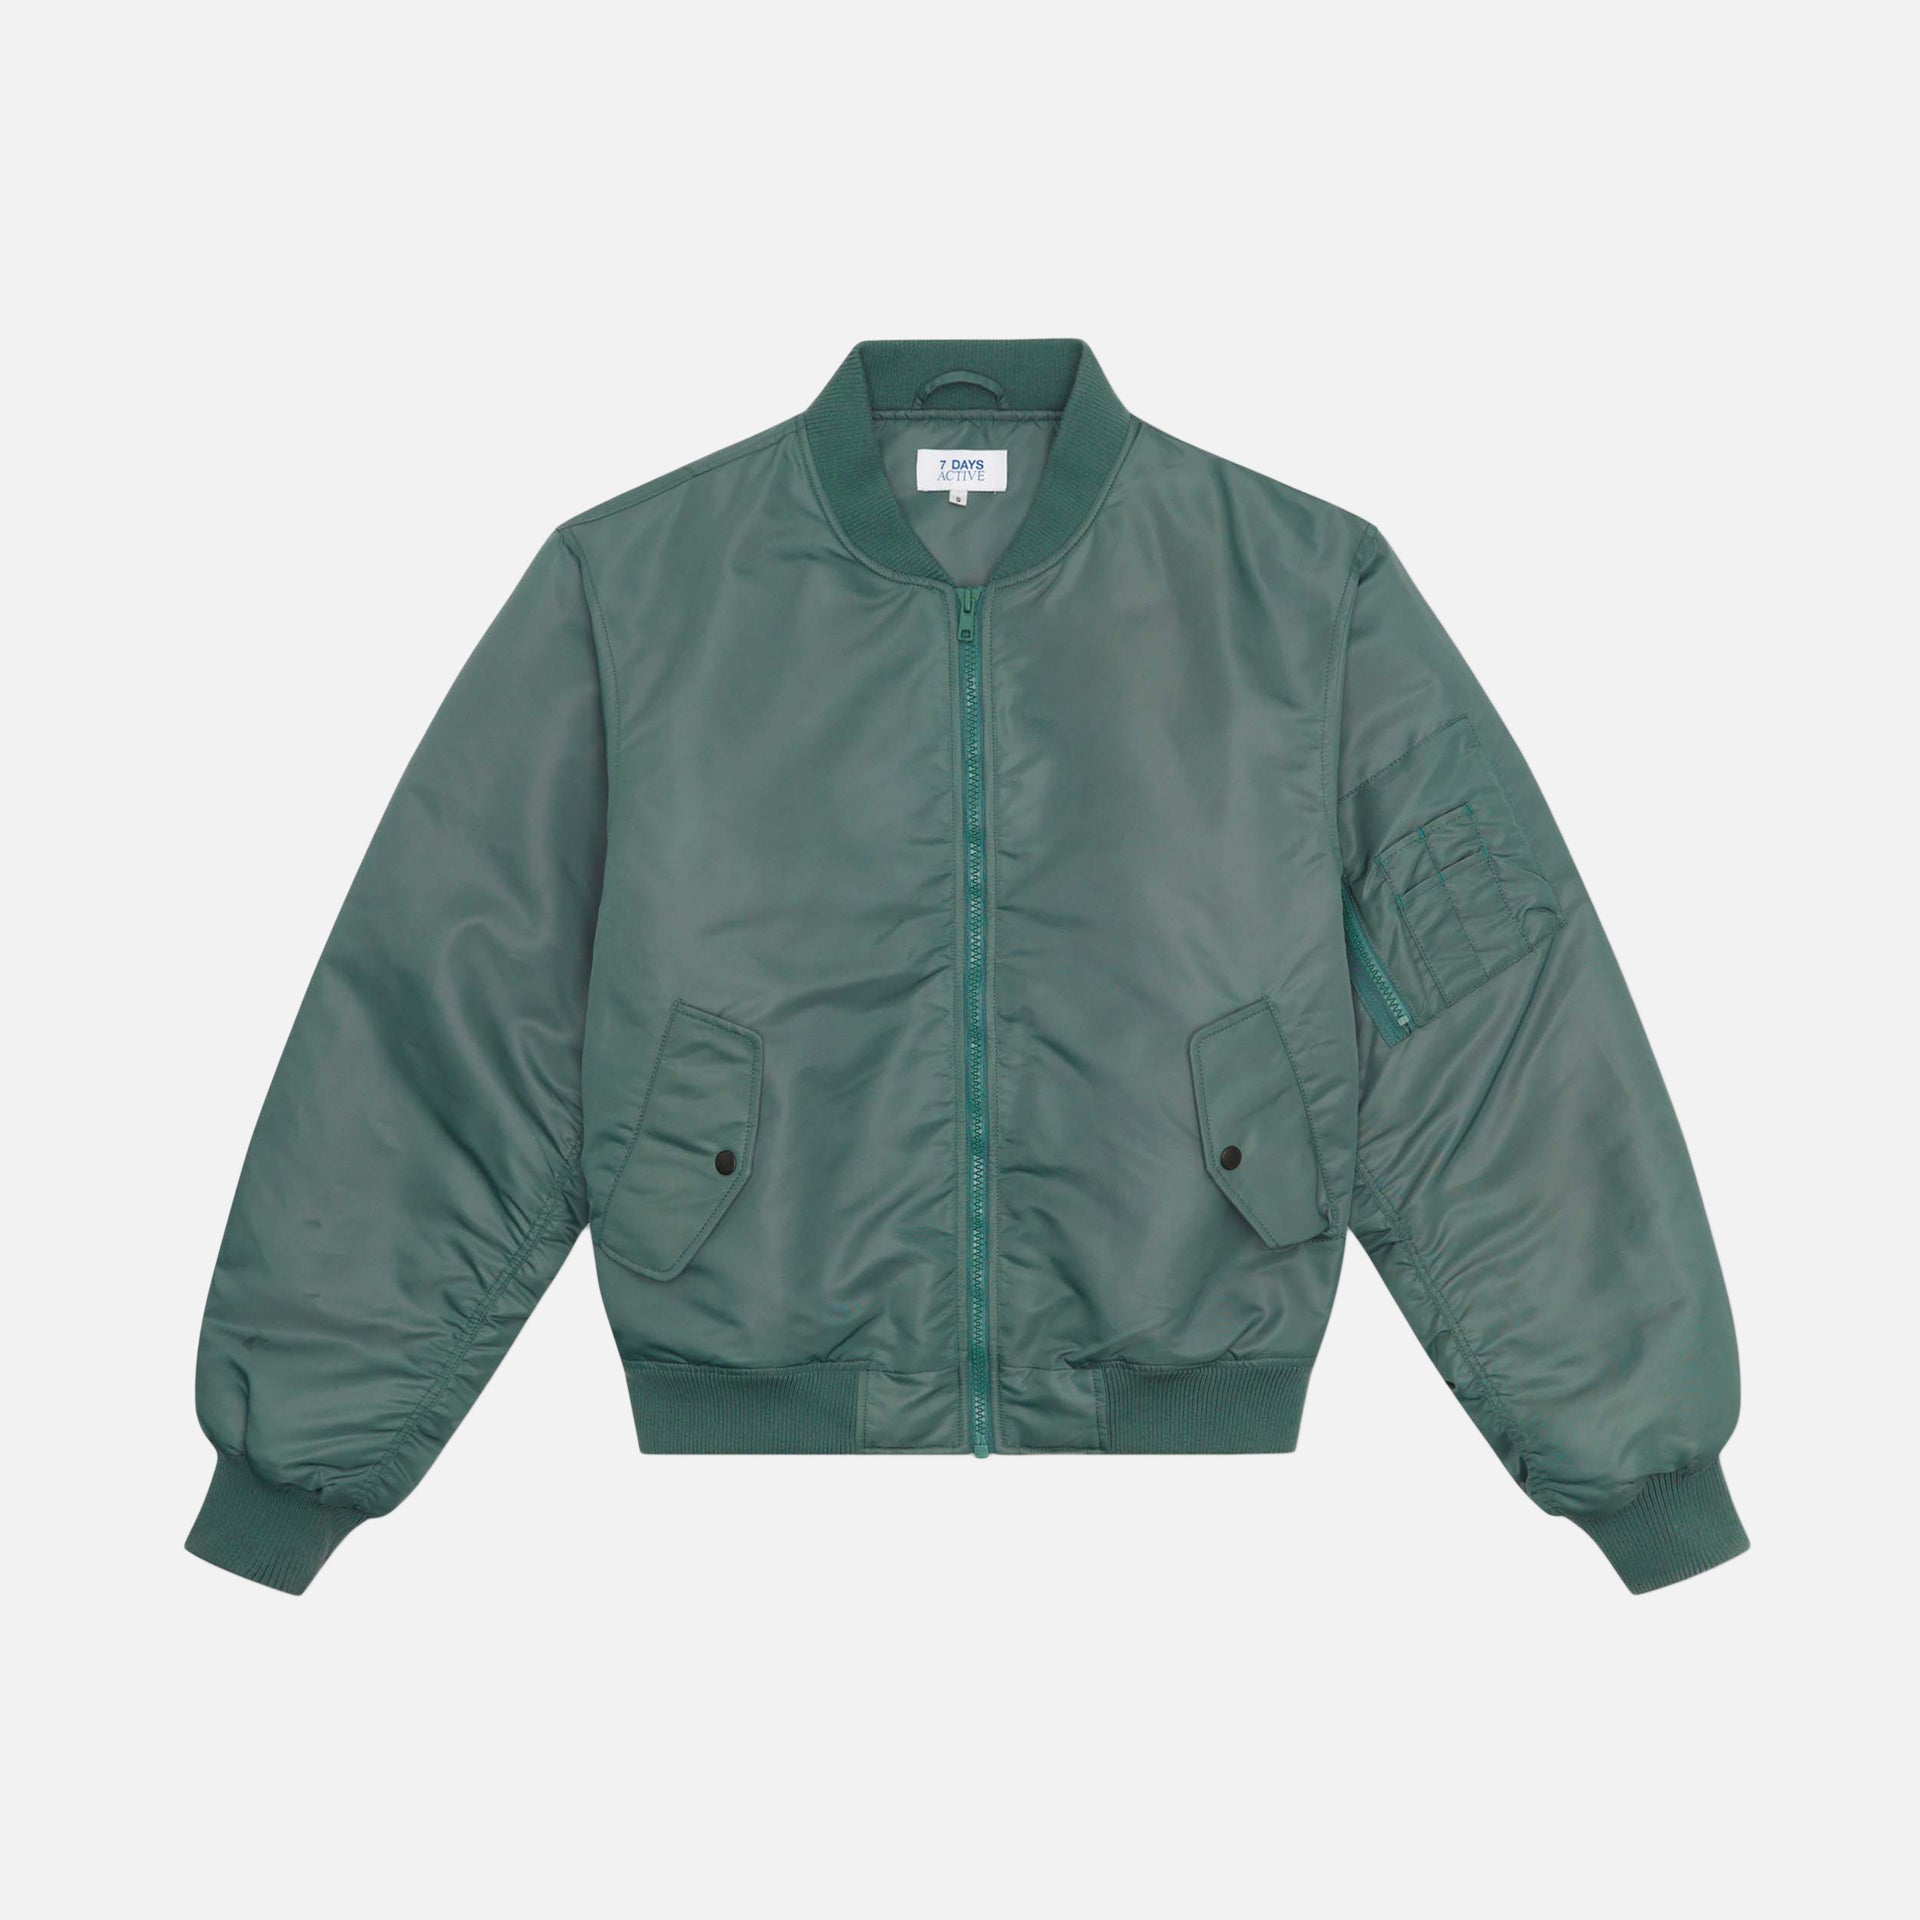 7 Days Active Bomber Jacket - Dust Green